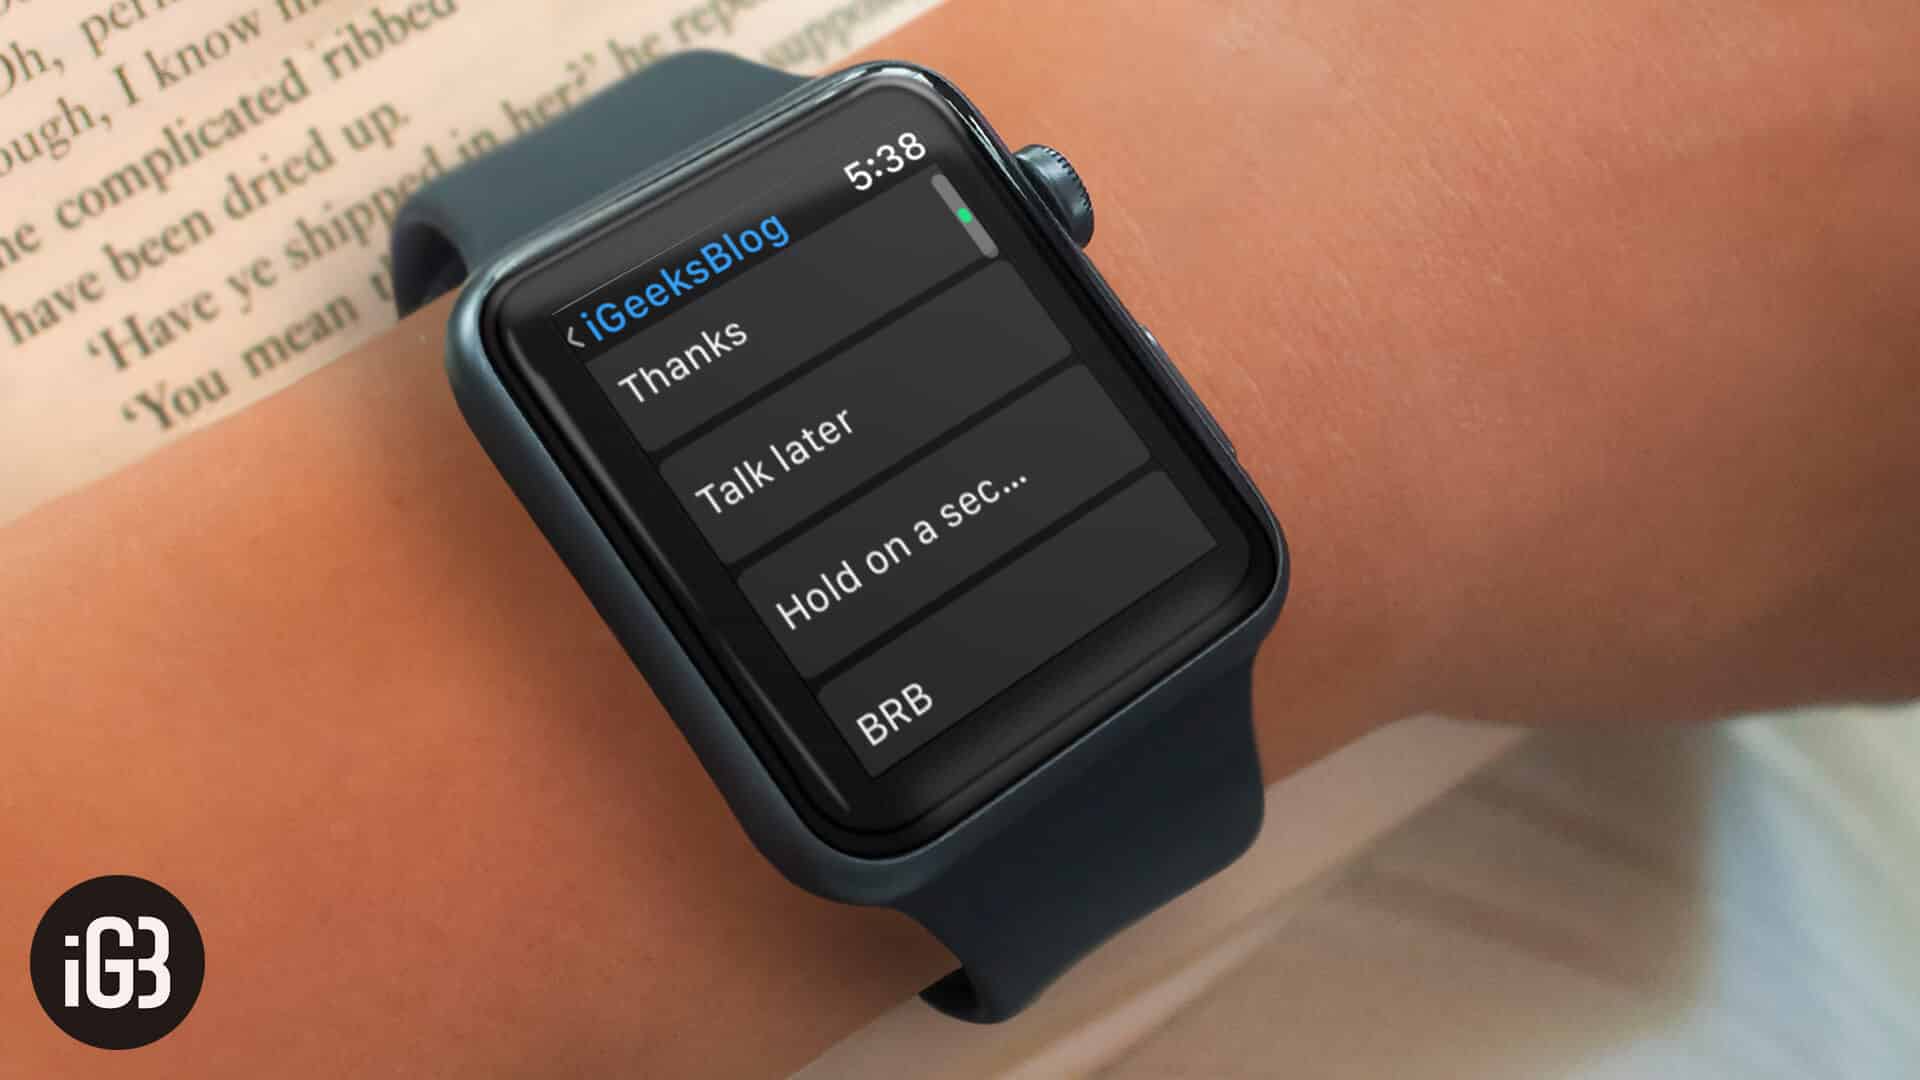 How to set default send as text option on apple watch to send text message